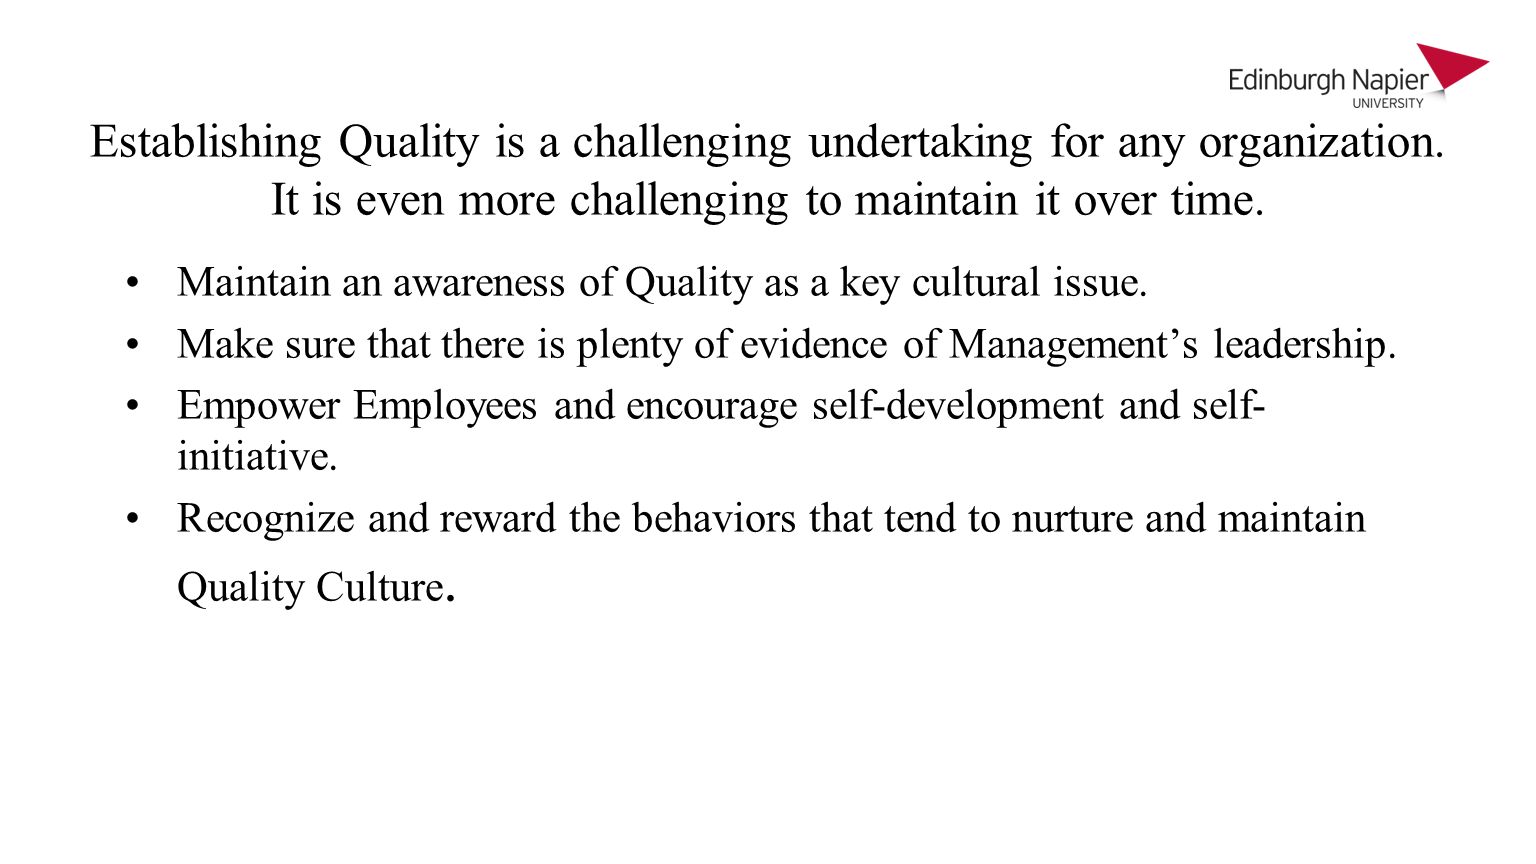 Establishing Quality is a challenging undertaking for any organization.